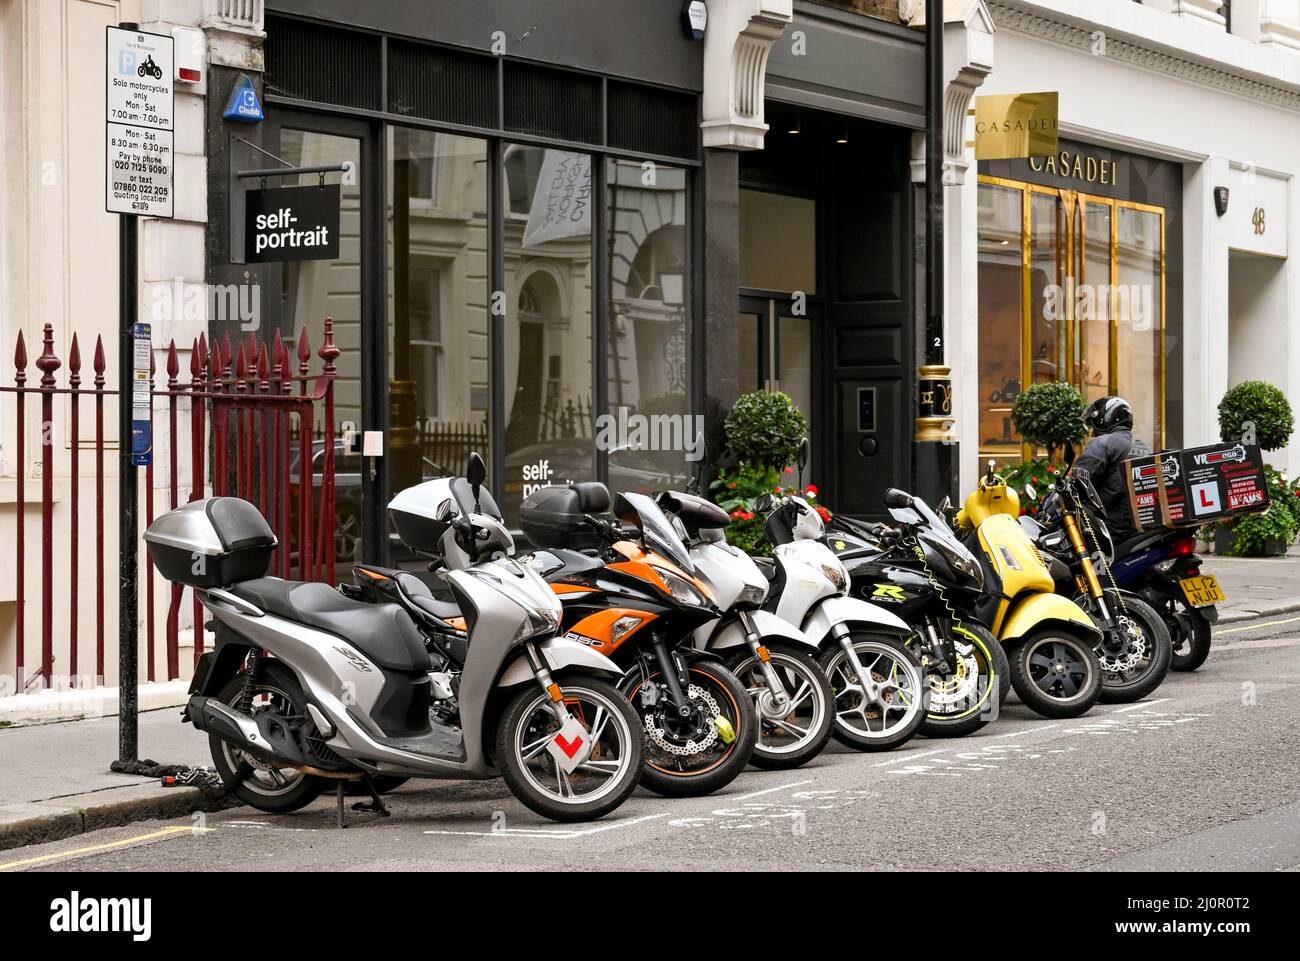 London, England - August 2021: Row of scooters parked in a designated parking bay on a London street Stock Photo